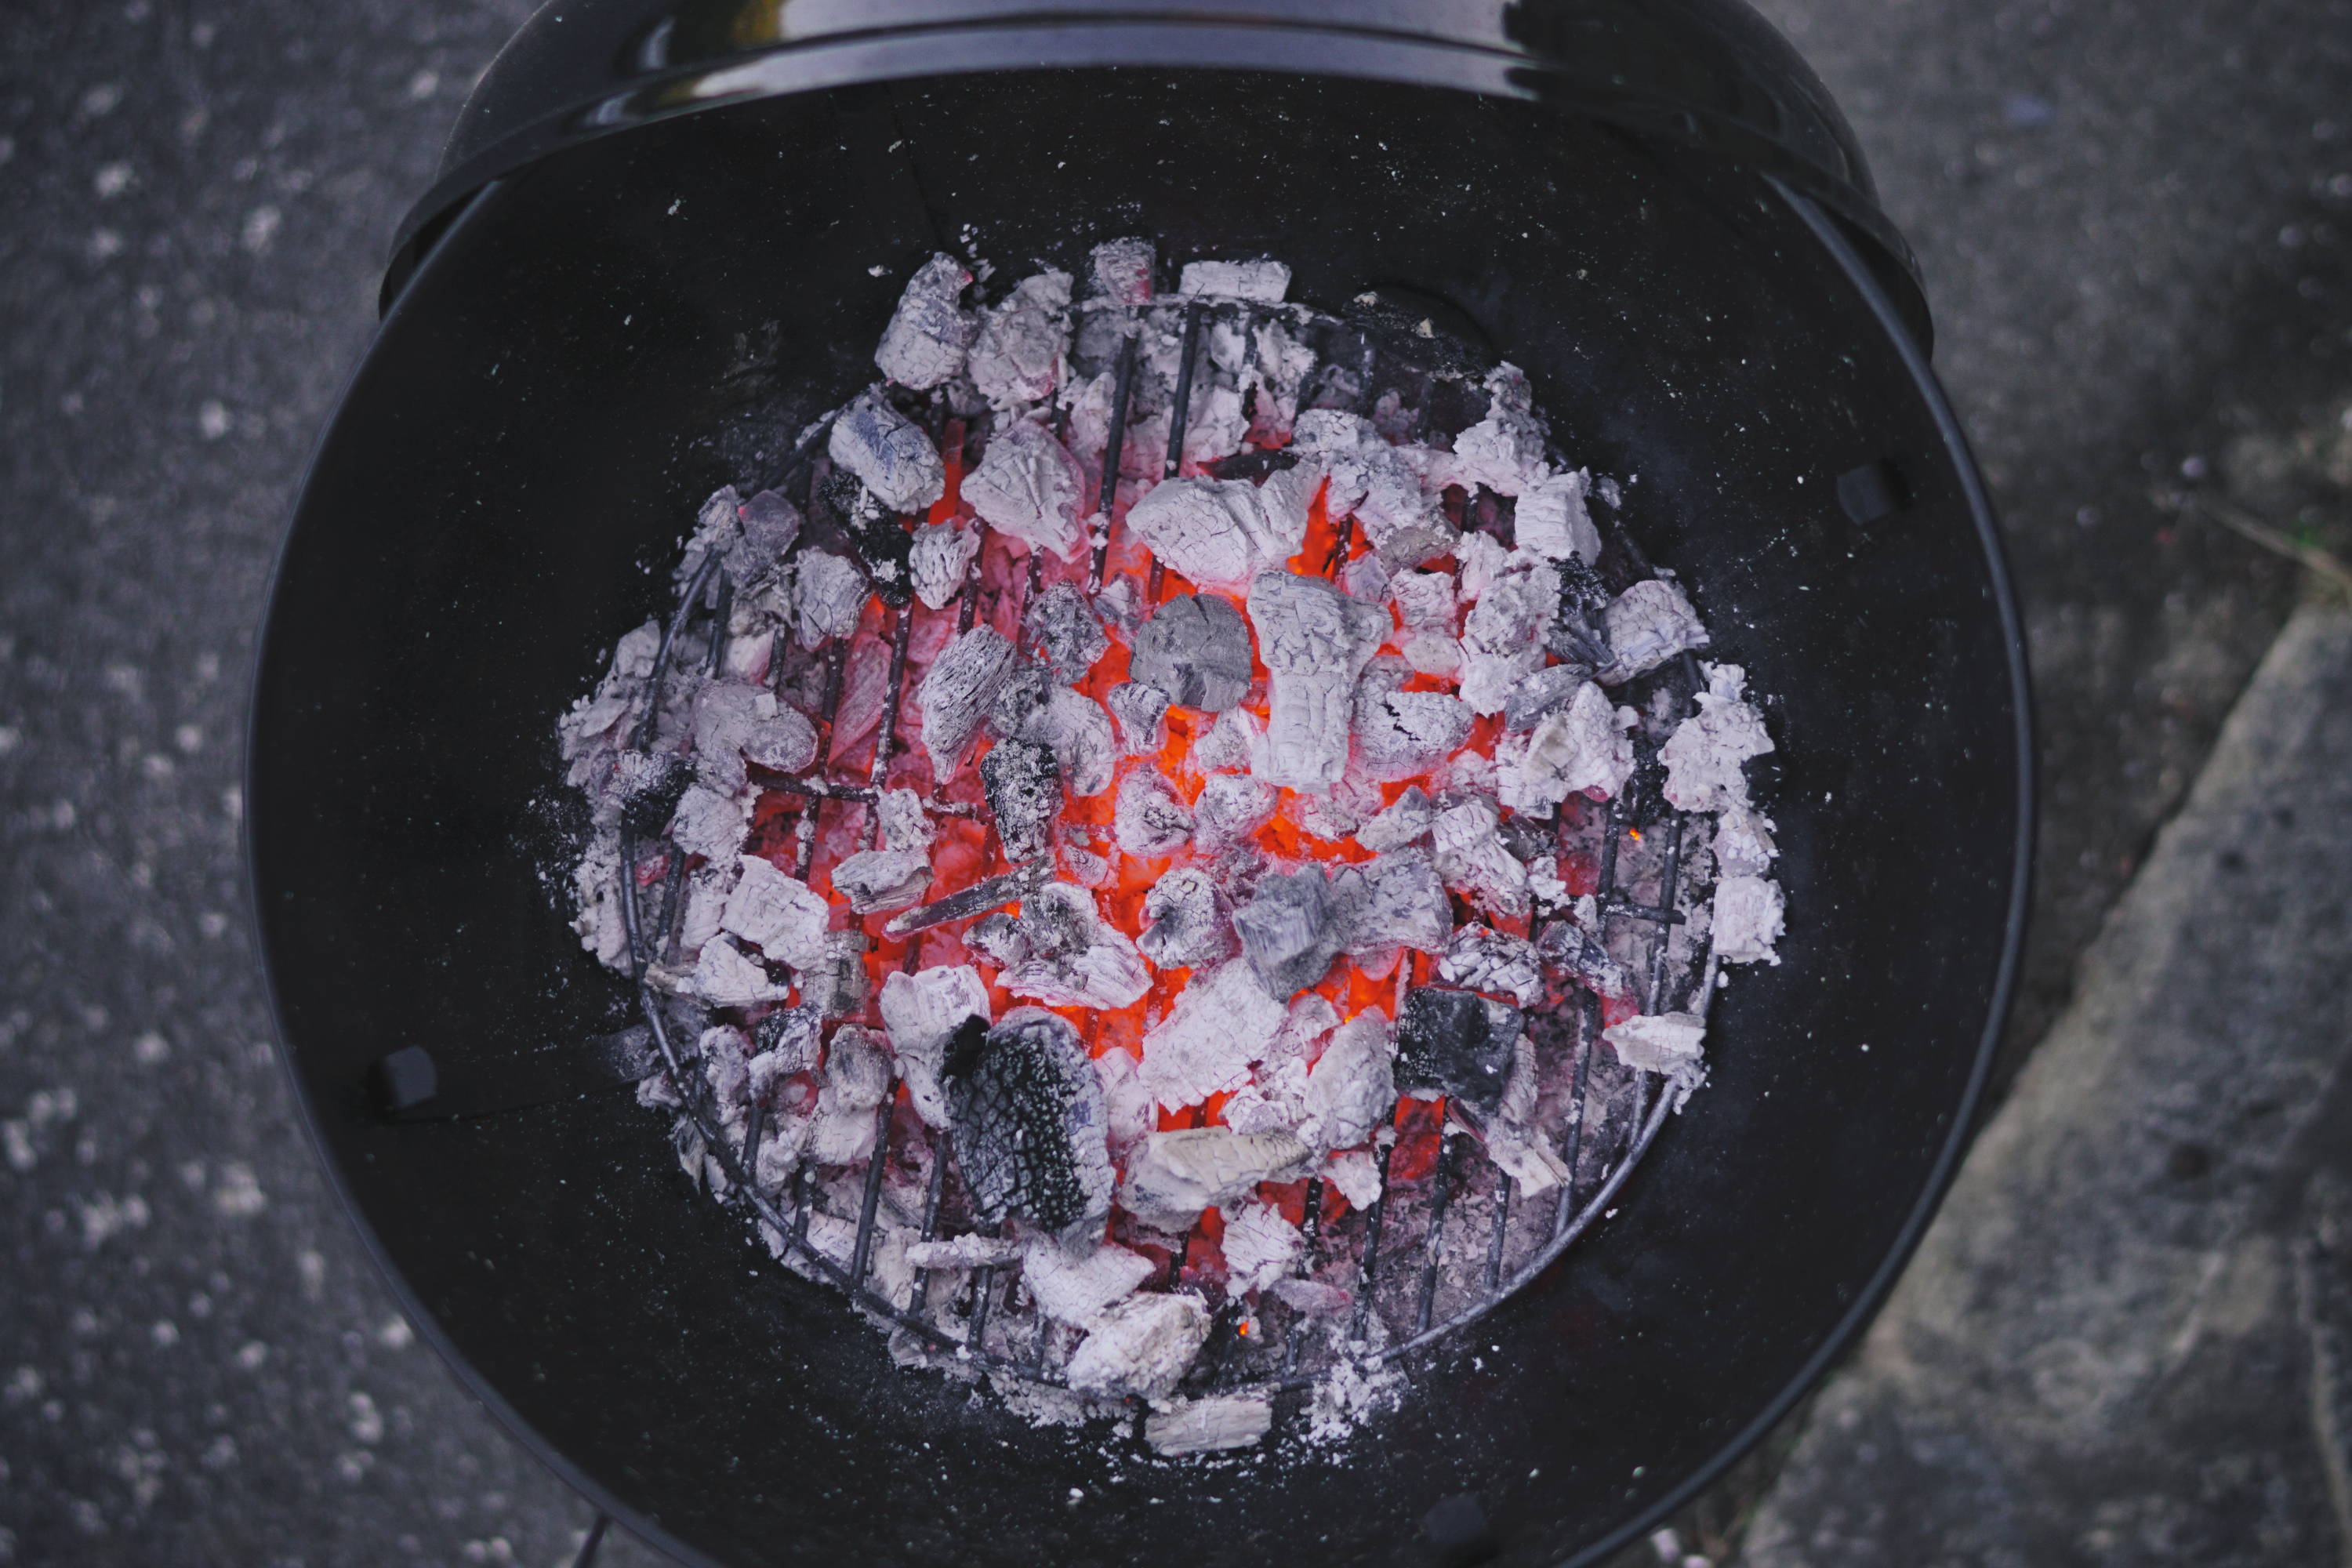 Mastering Your Charcoal Grill. Ashy charcoal glows at bottom of grill.